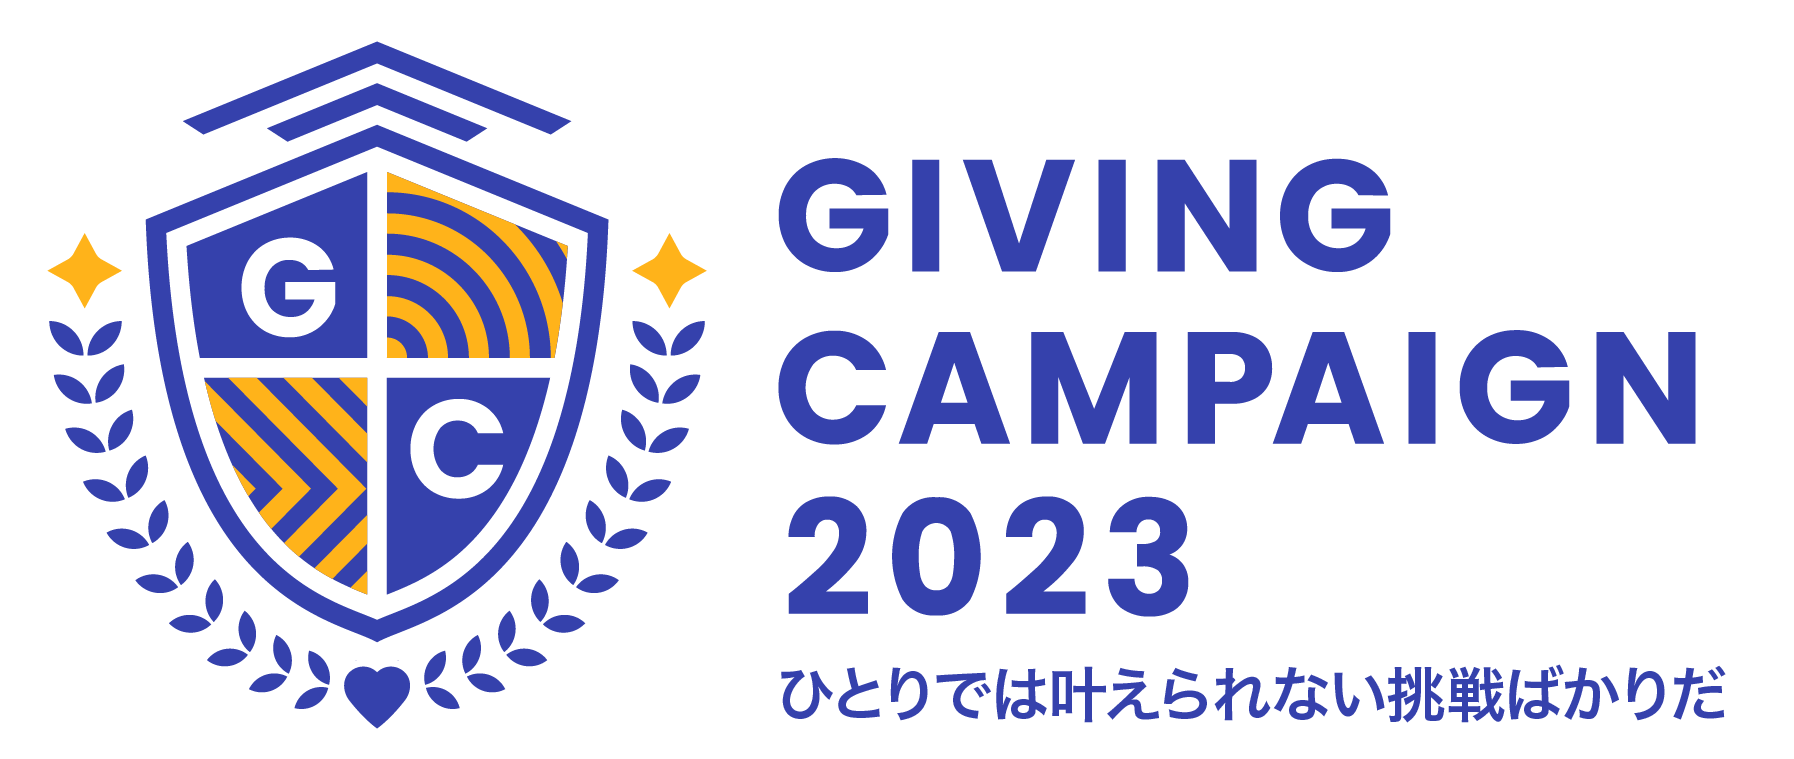 Giving Campaign Logo